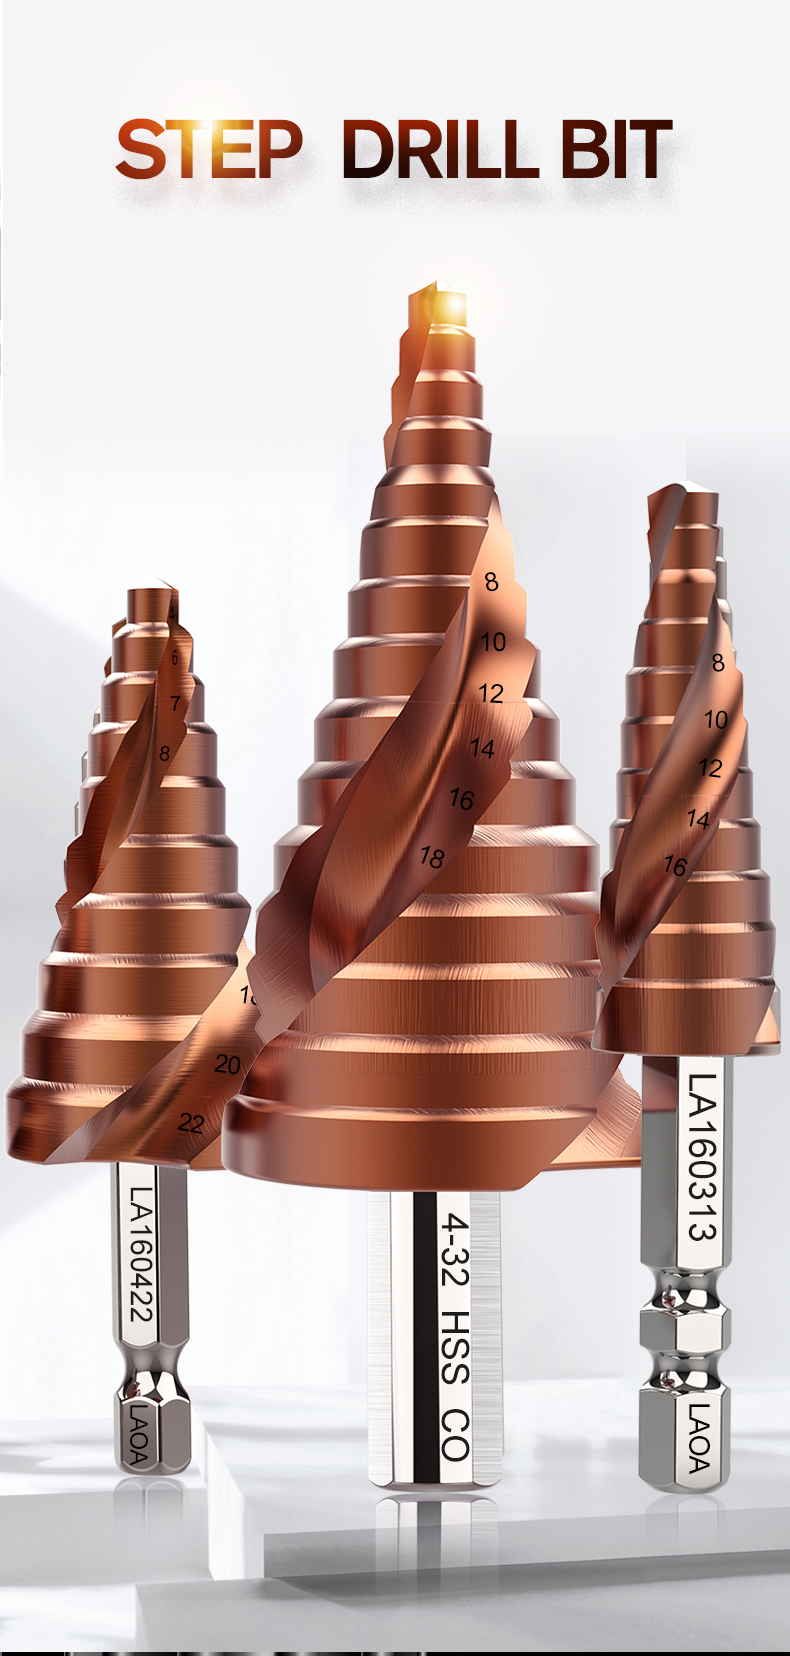 LAOA-3-13mm-4-22mm-4-32mm-Pagoda-Step-Drill-Bit-HSS-CO-M35-Hex-Triangle-Spiral-Grooved-Wood-Metal-Ho-1865380-1